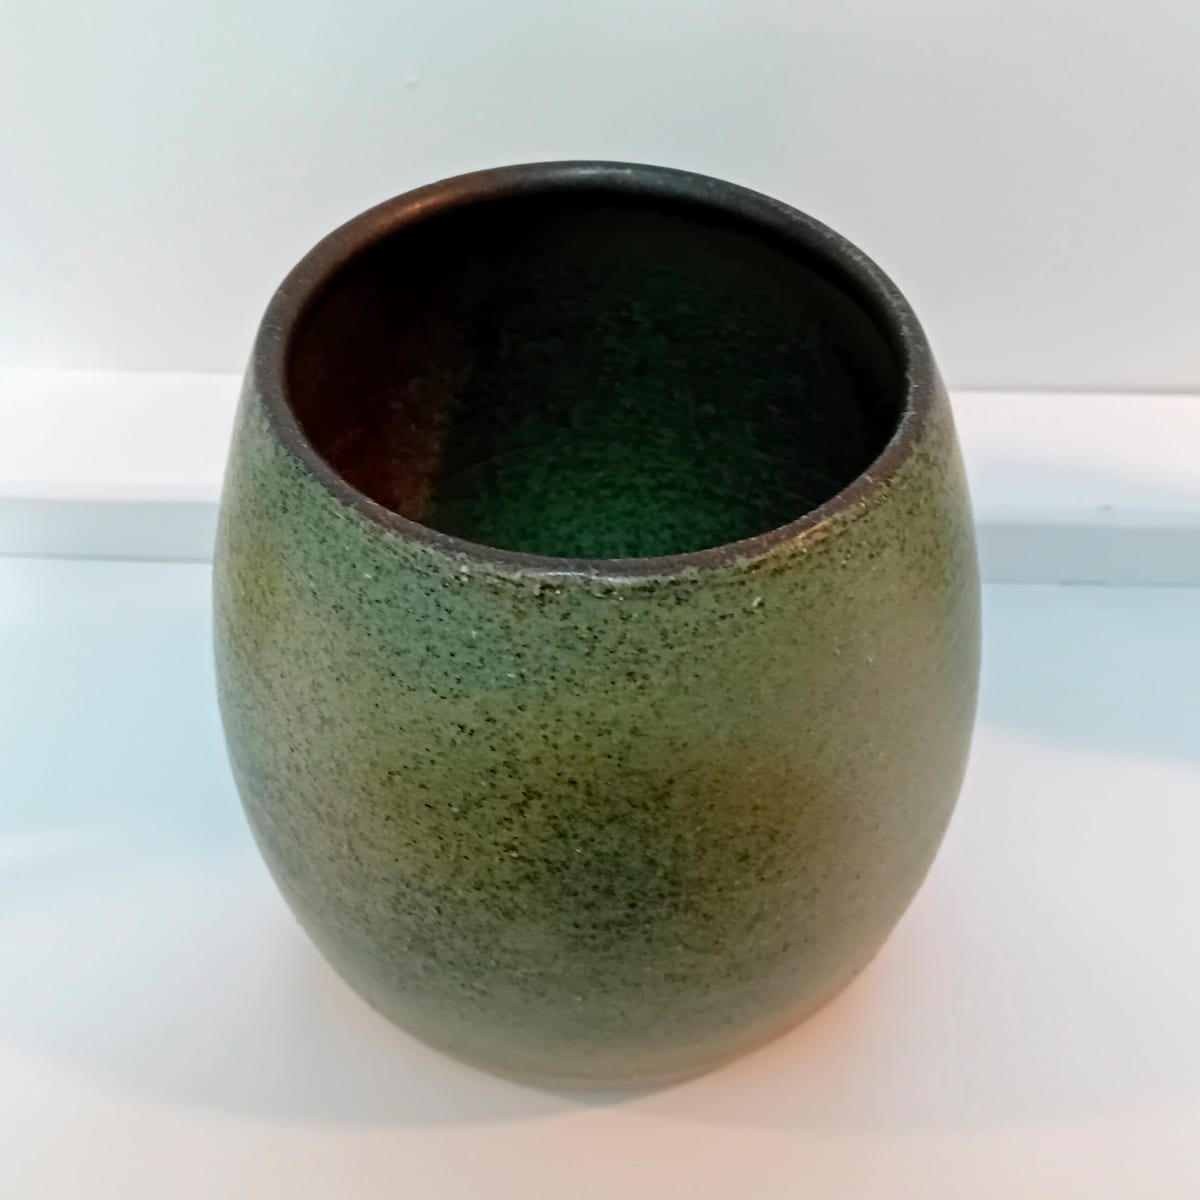 Green Rustic Ceramic Pot by Sheelagh Paterson  Image: Green Rustic Ceramic Pot by Sheelagh Paterson